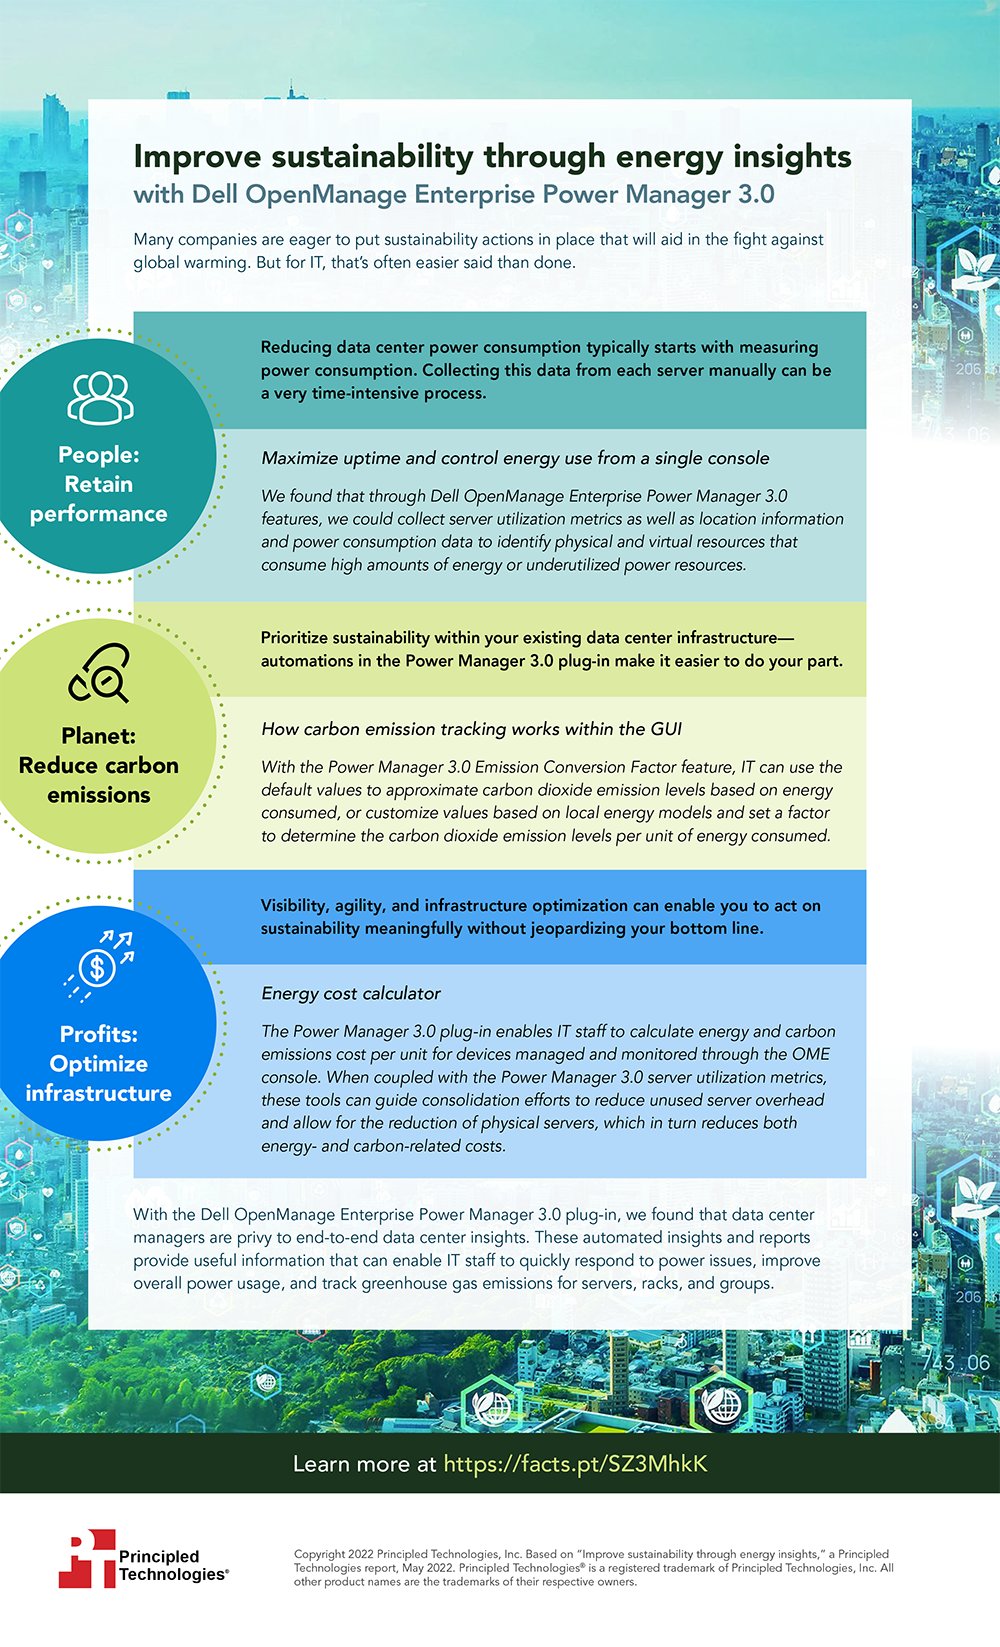 Improve sustainability through energy insights - Infographic